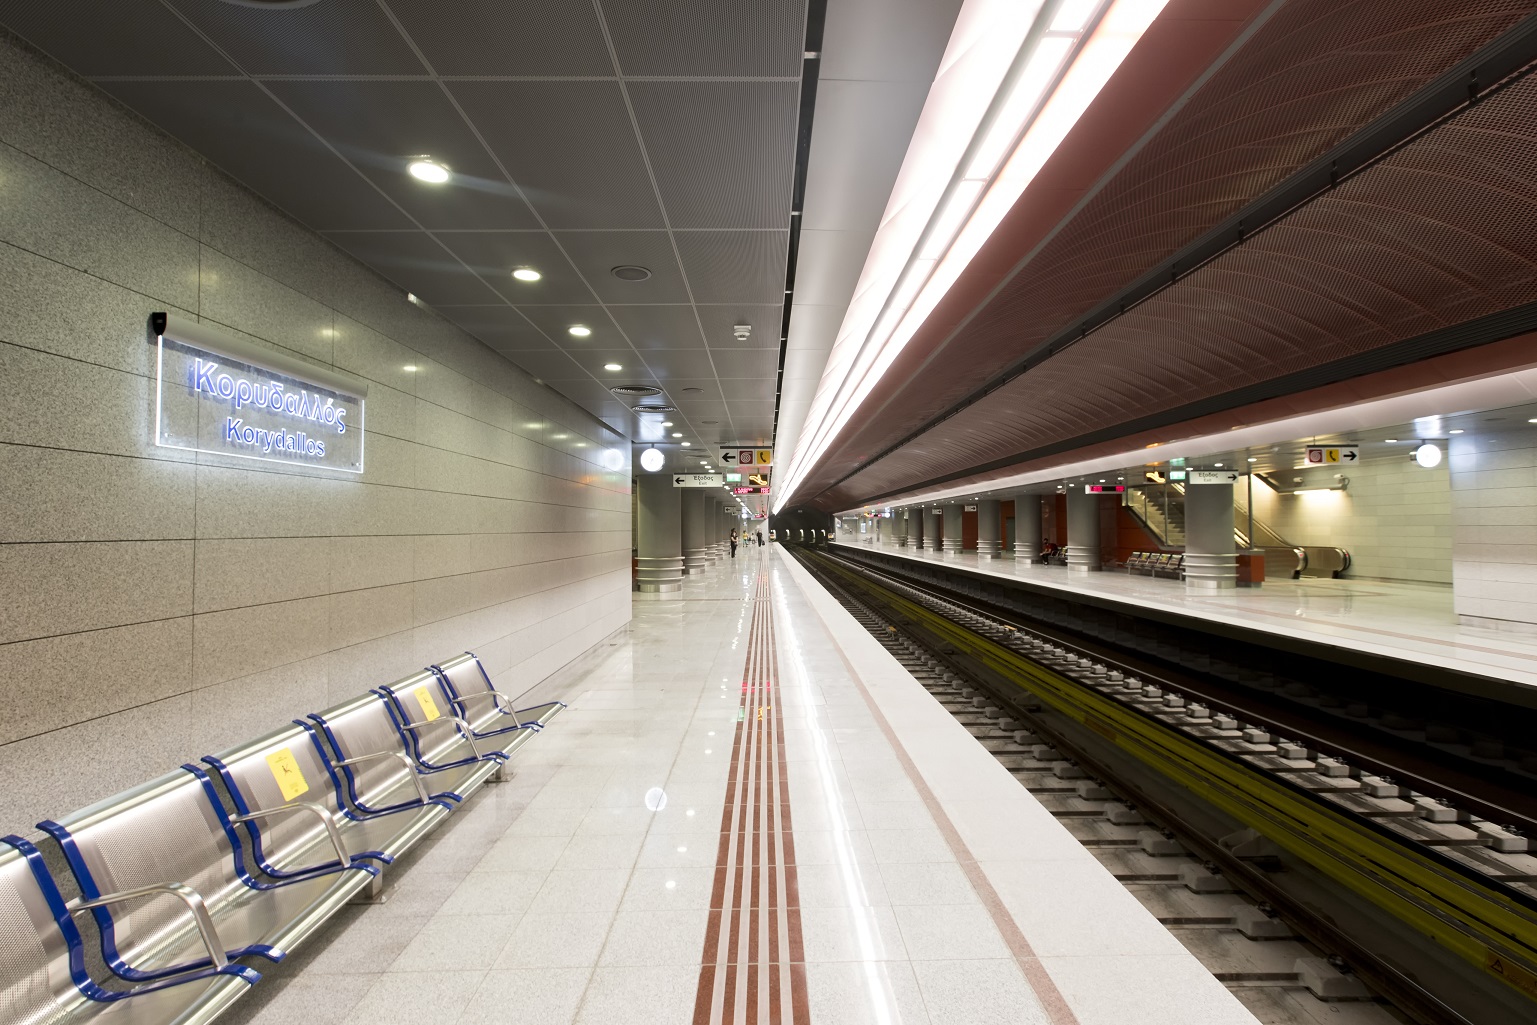  The Line 3 metro will take an estimated 11,000 cars off the roads in Athens. Image from LafargeHolcim